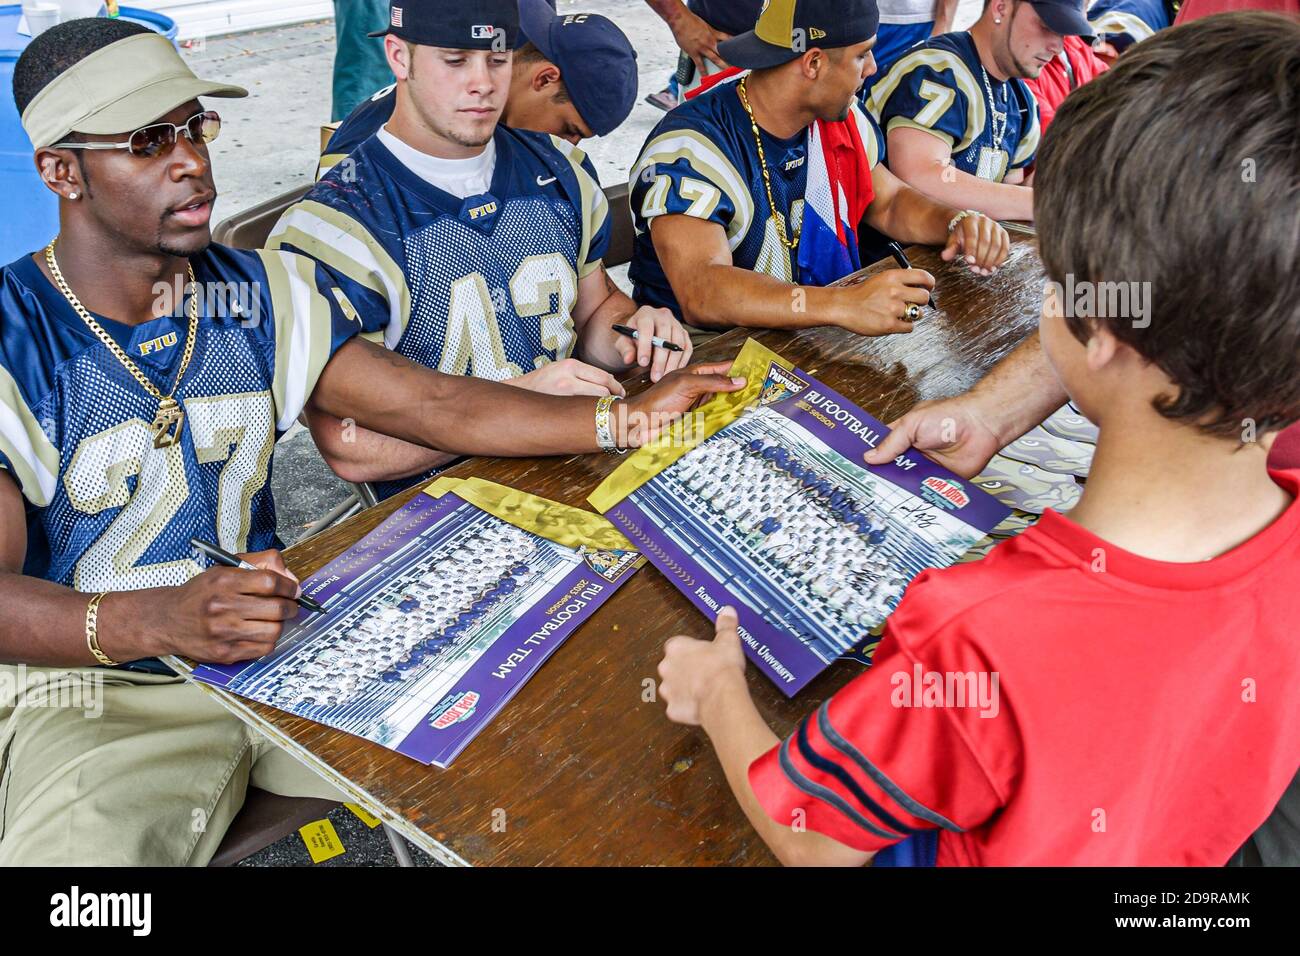 Miami Florida,Little Havana,Calle Ocho Festival,annual event FIU football players signing autographs,Black African man male student, Stock Photo